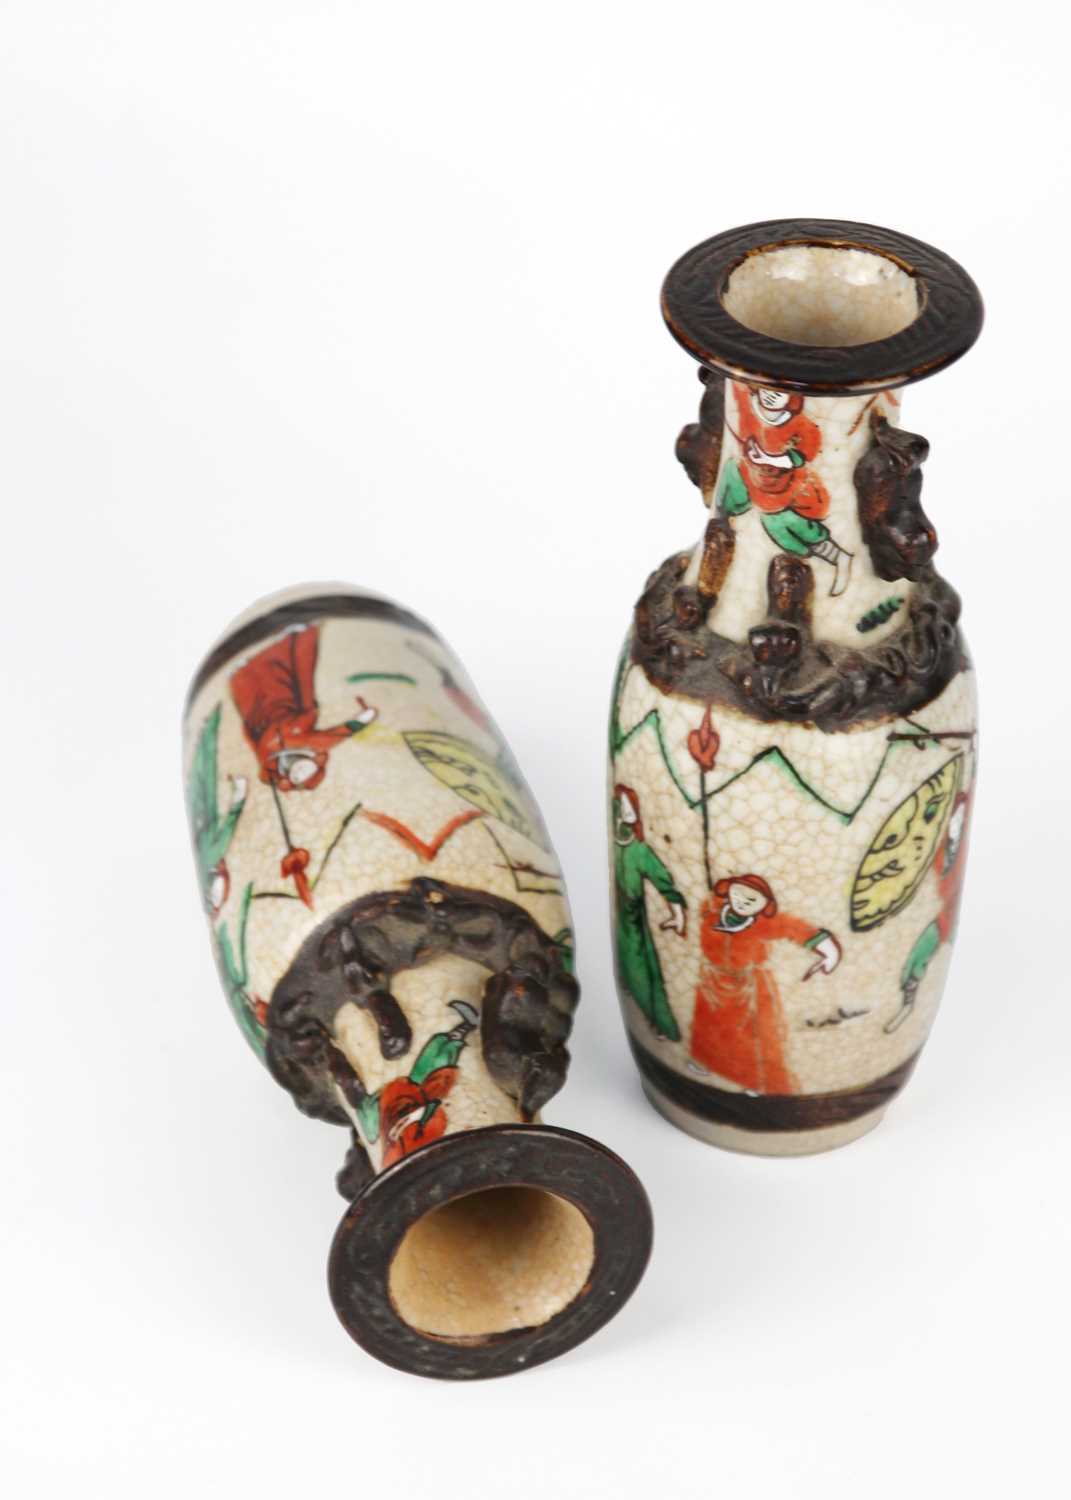 A pair of Chinese crackle glazed vases, 19th century. - Image 5 of 6